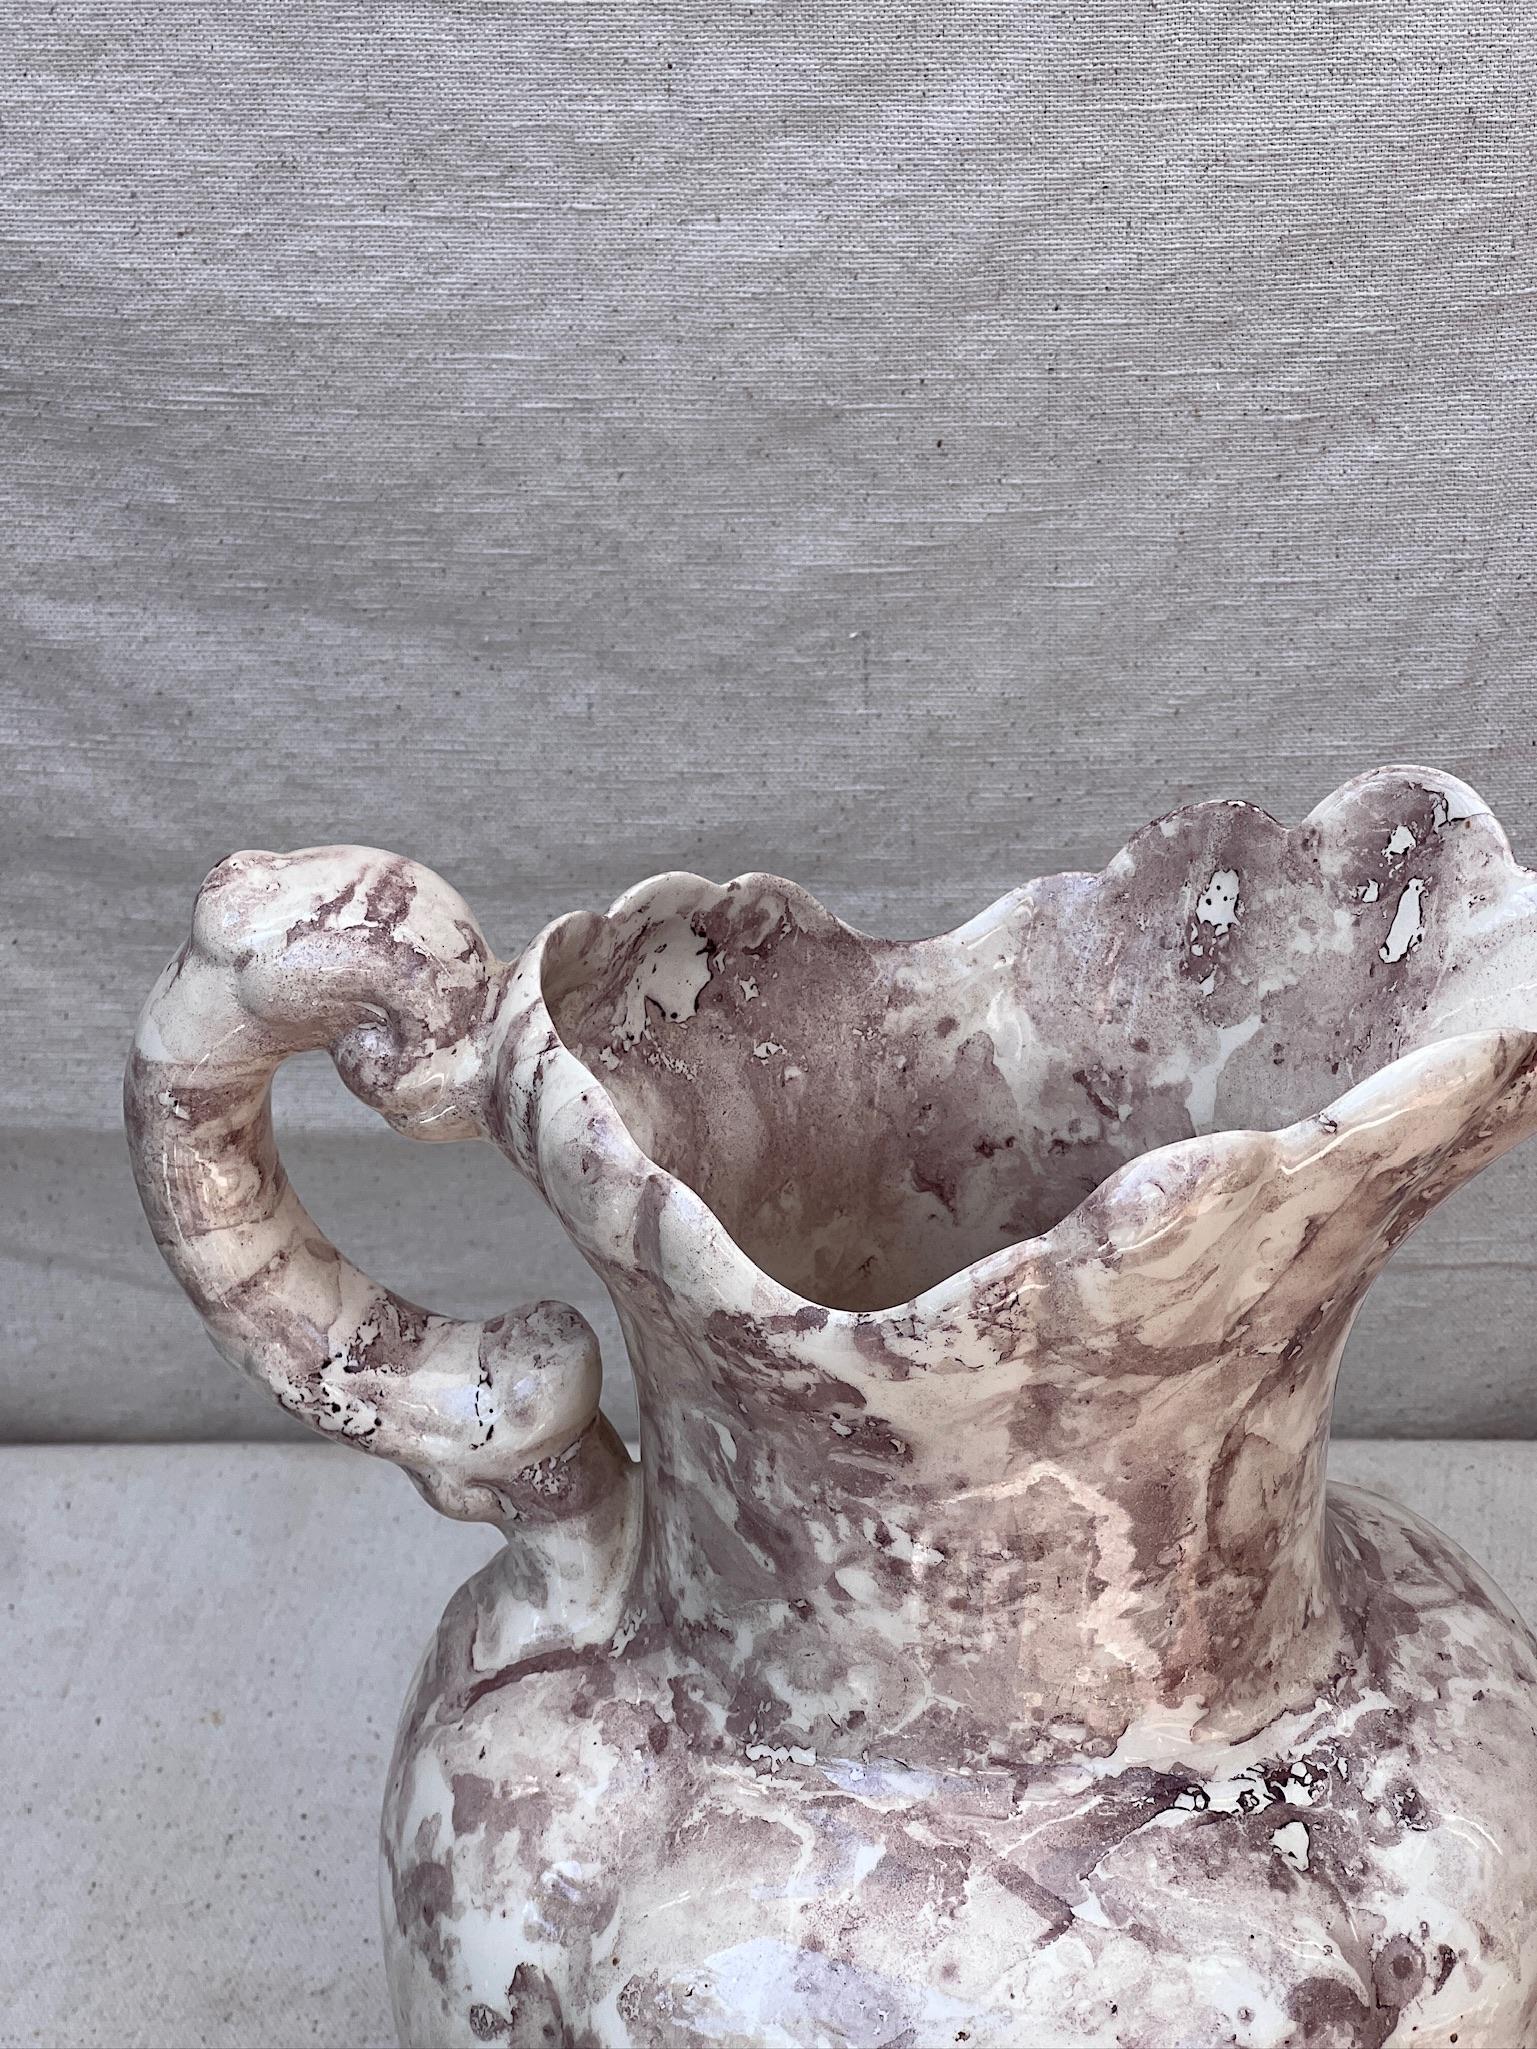 The 1980s vintage ceramic flower vase: hand-painted elegance reminiscent of marble in a subtle purple and white palette.
(a drainage hole is existing)